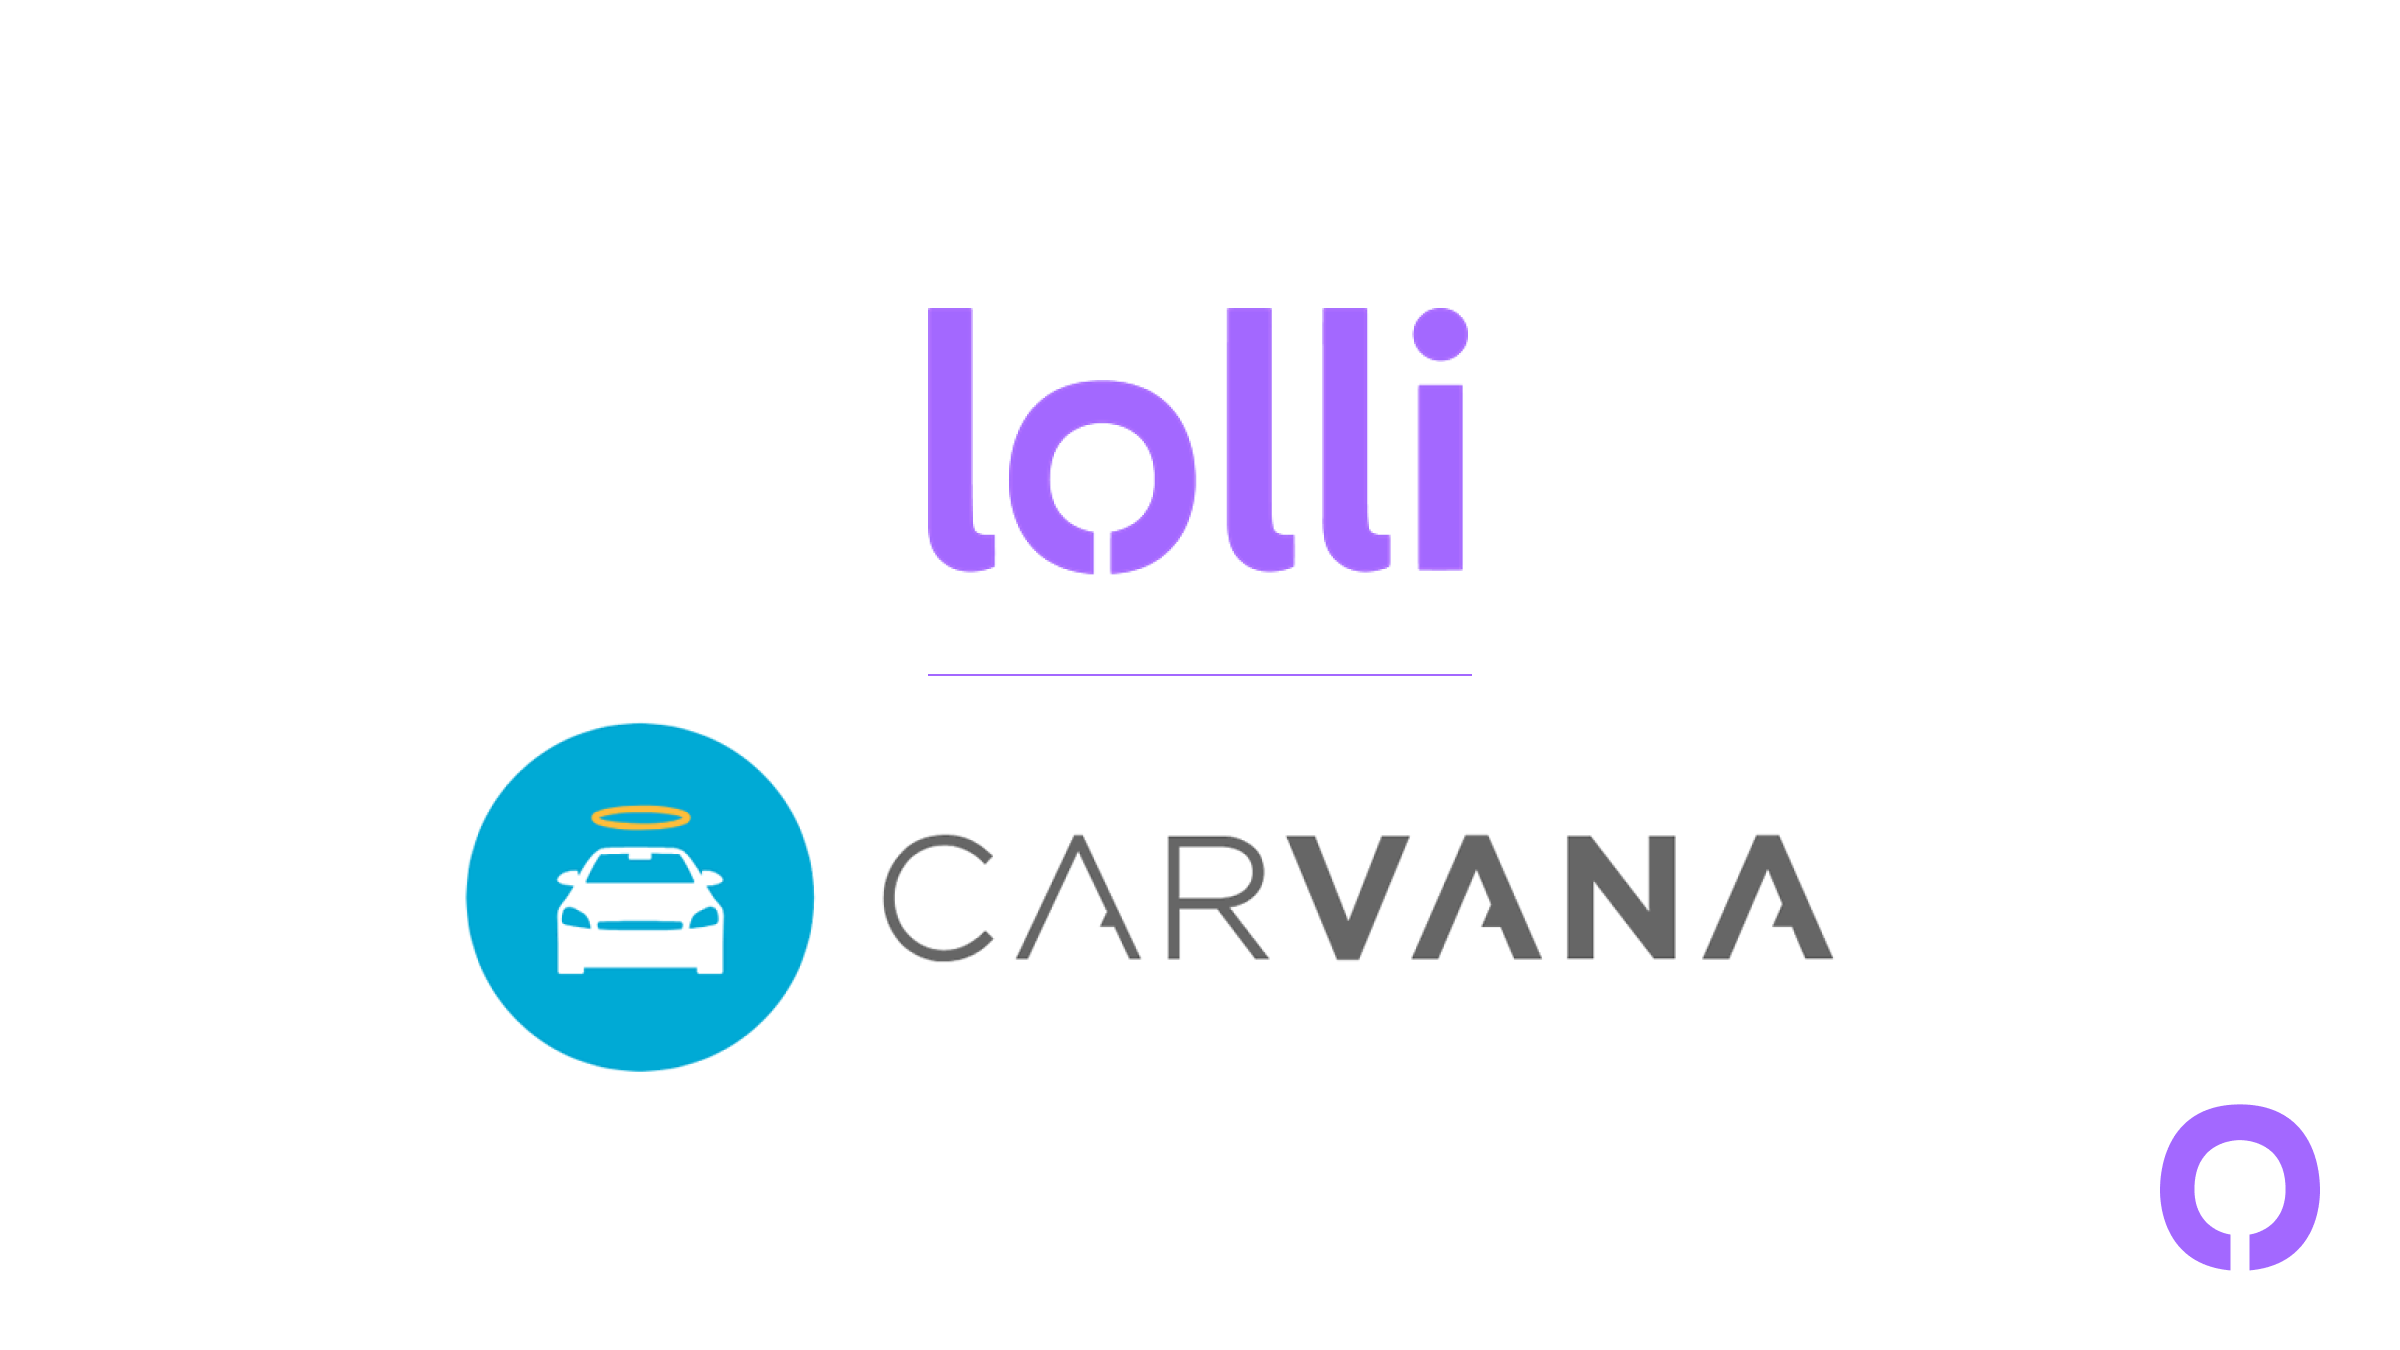 Carvana is Now on Lolli!